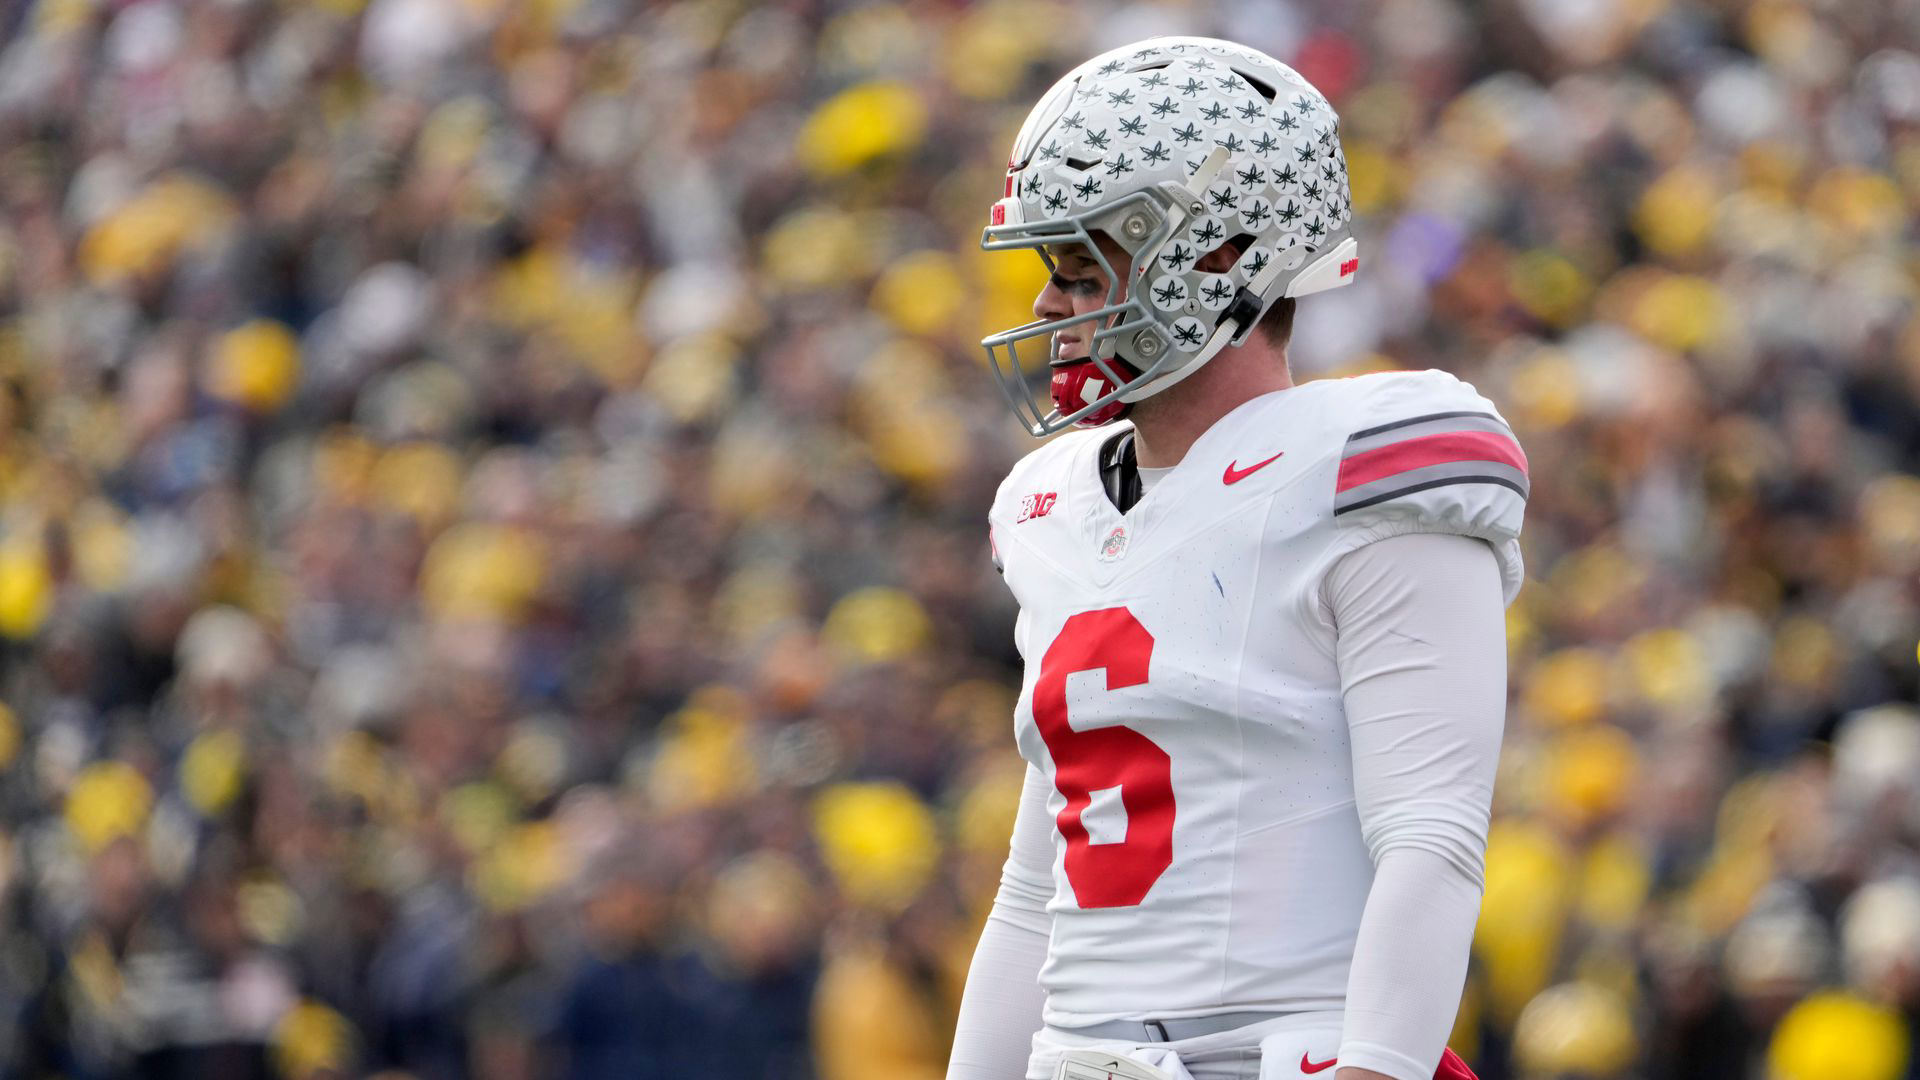 Ohio State still has a shot at the playoffs, but do you really want